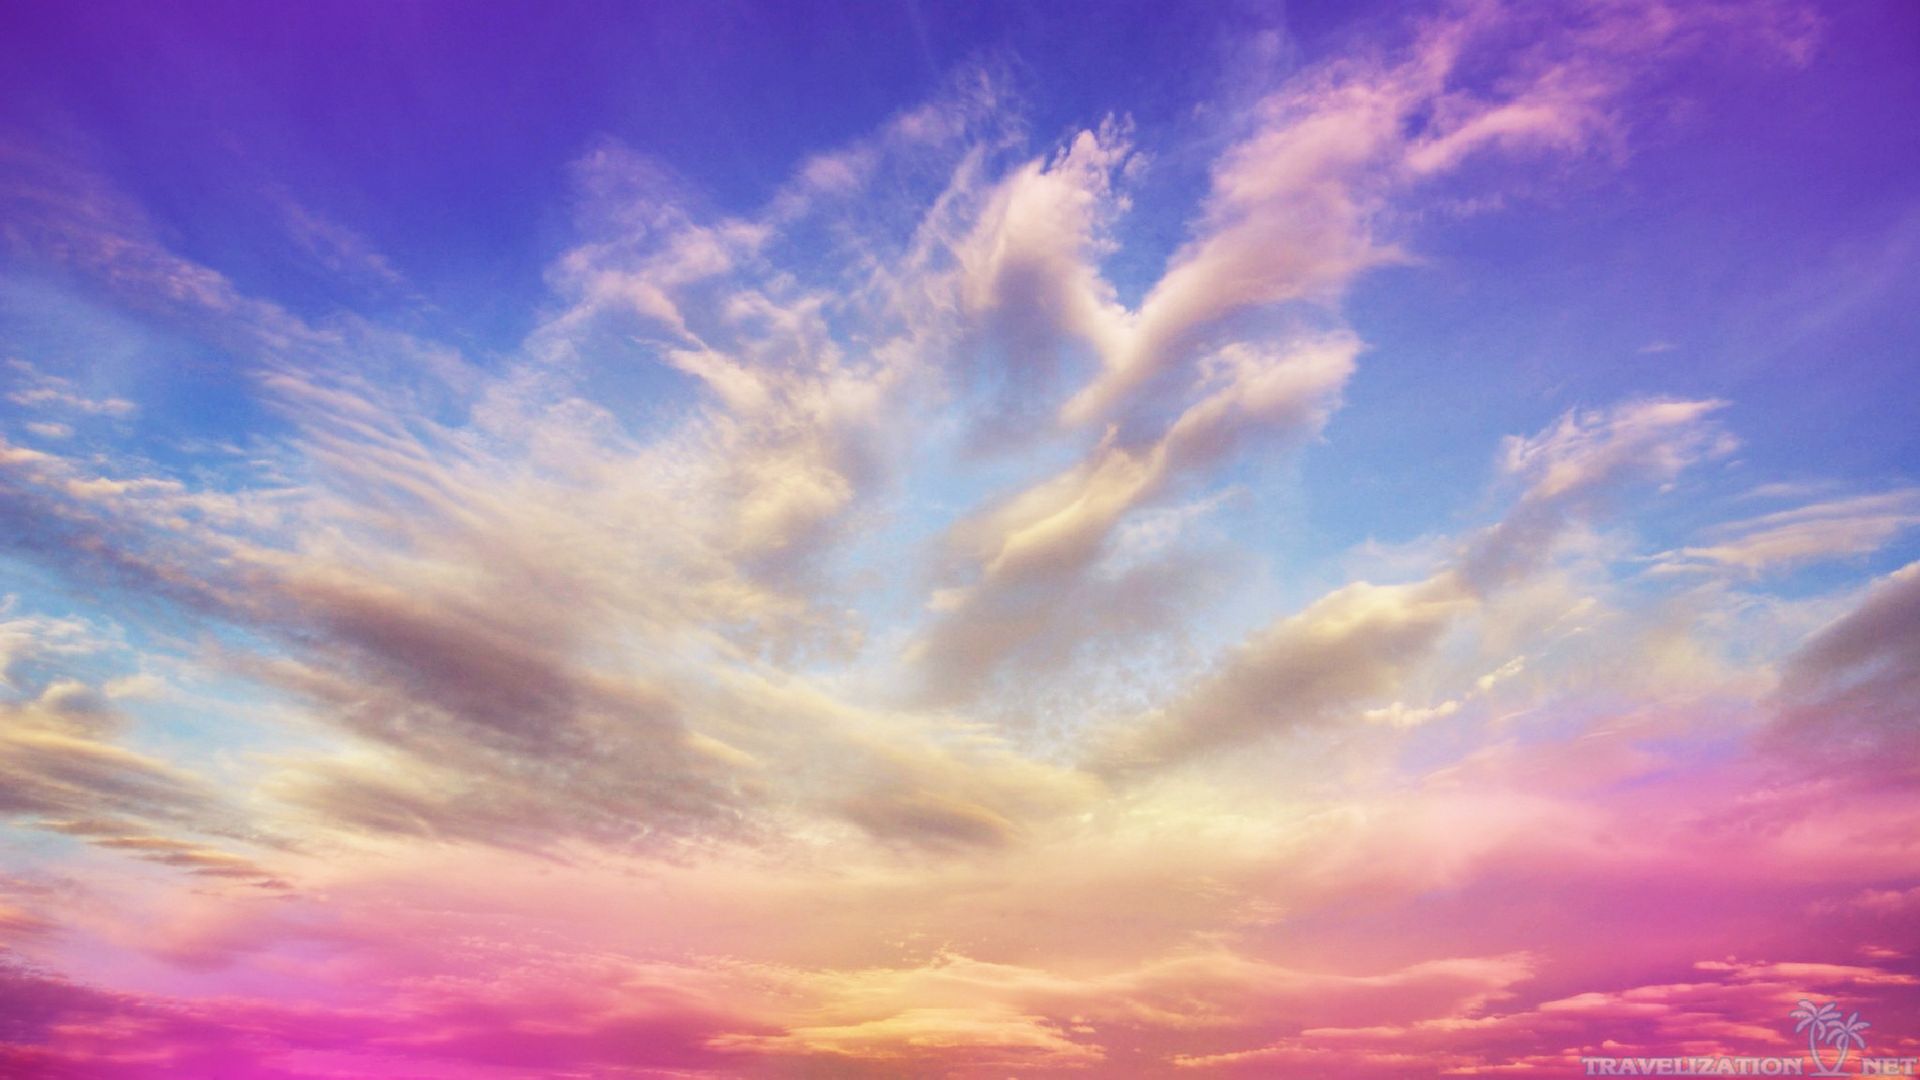 Colorful Sky Wallpaper - http://wallpaperzoo.com/colorful-sky | Epic ...